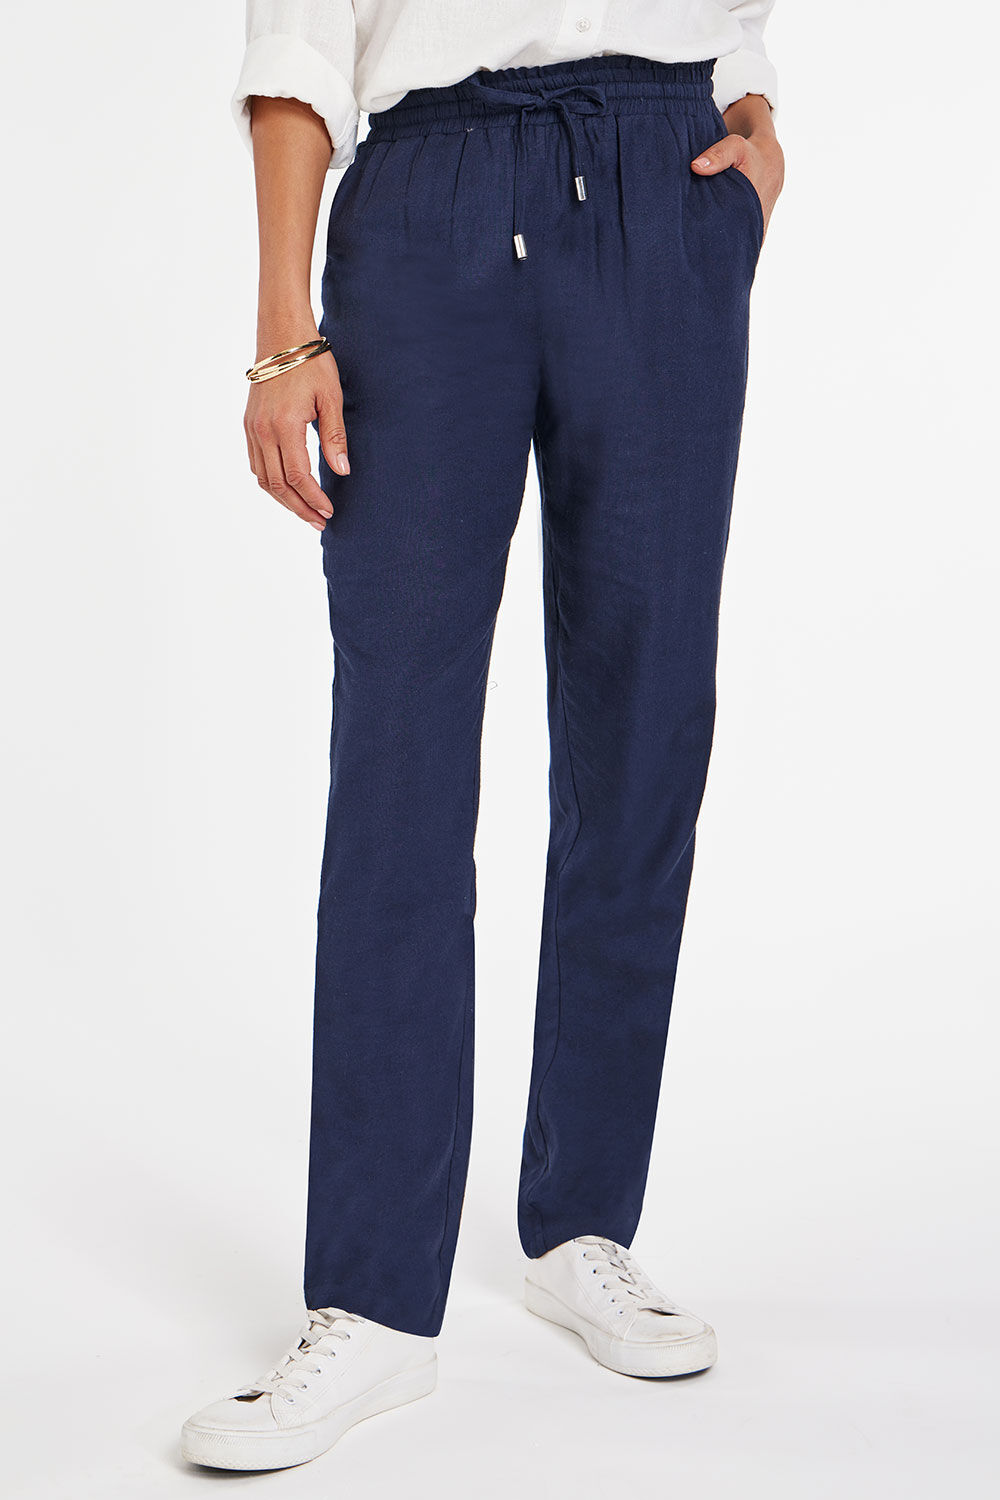 Bonmarche Navy Paperbag Tie Waist Tapered Linen Trousers, Size: 10